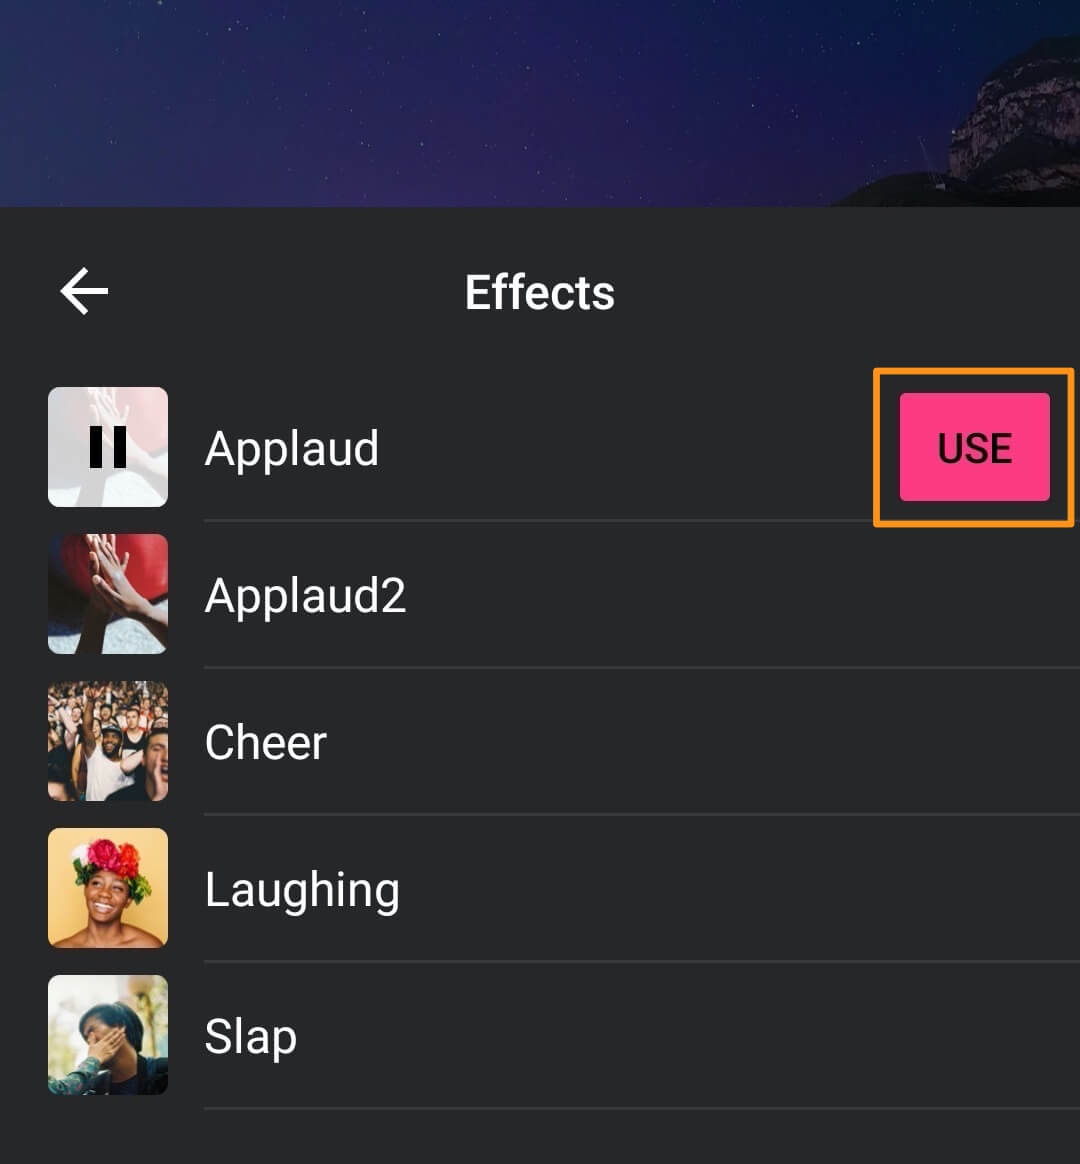 tap use to use the sound effect in video